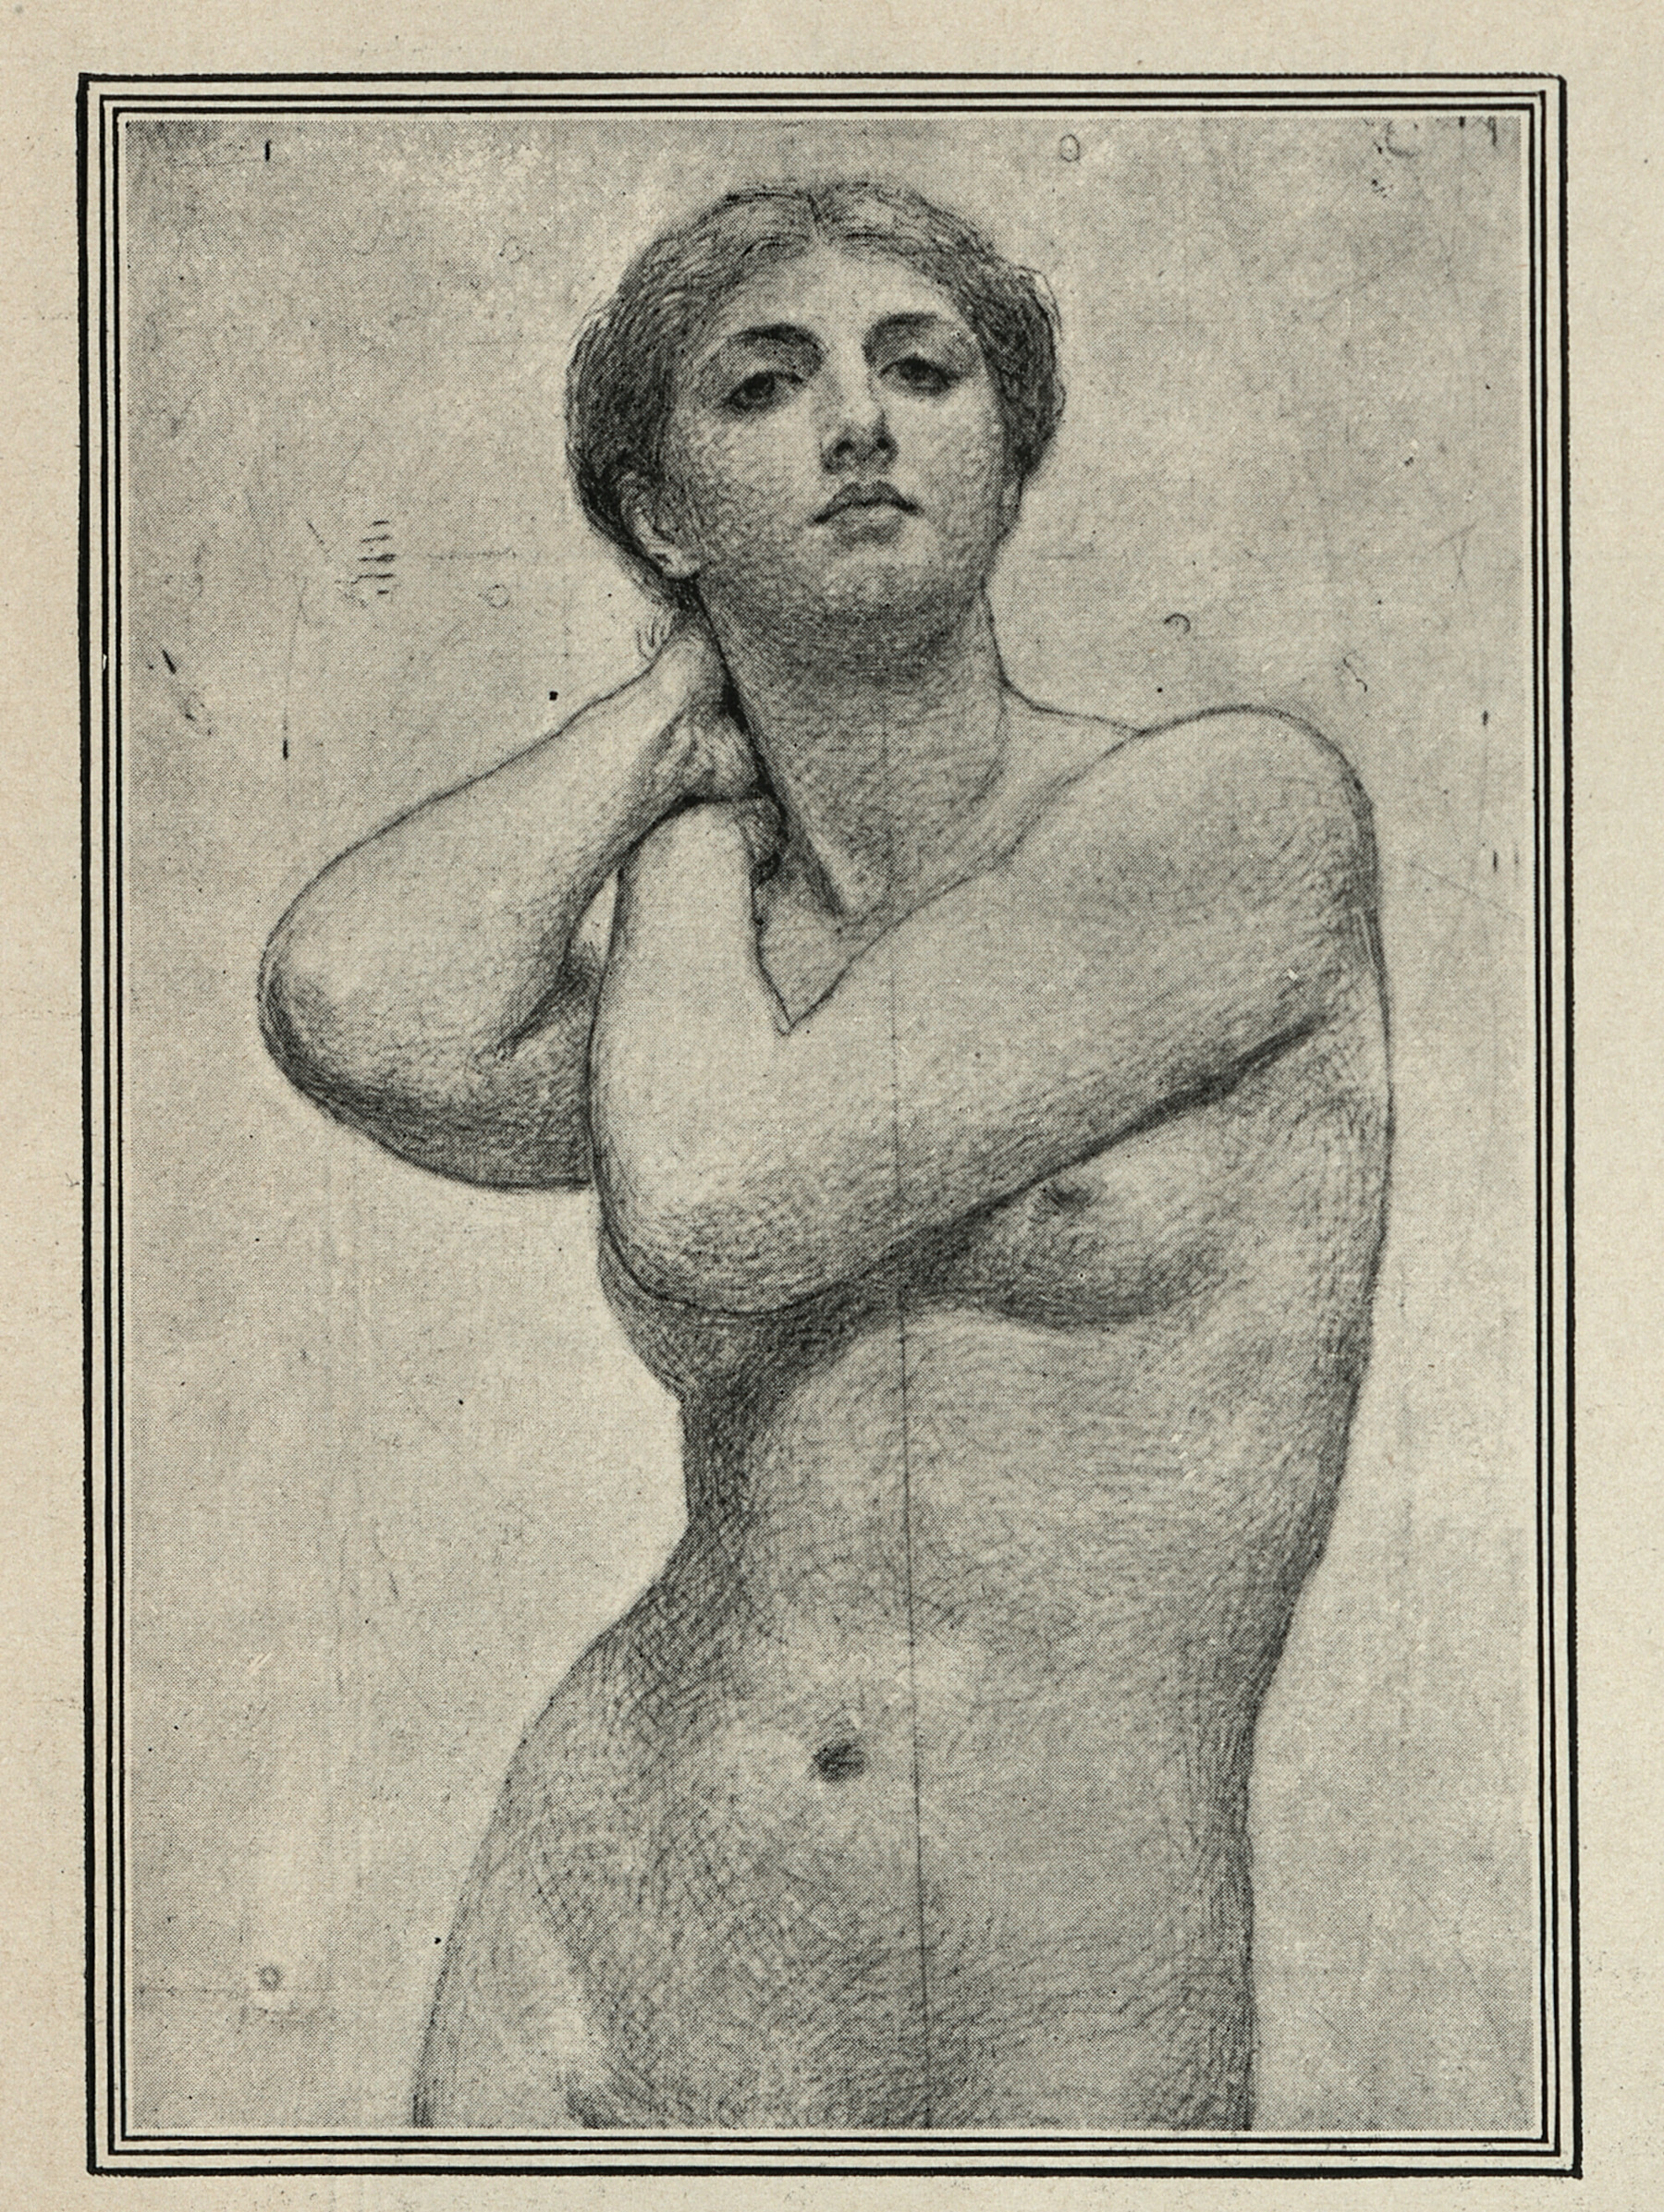 A half-length, rendered illustration of a nude female figure. Her body is front-on, and she gazes directly at the viewer.